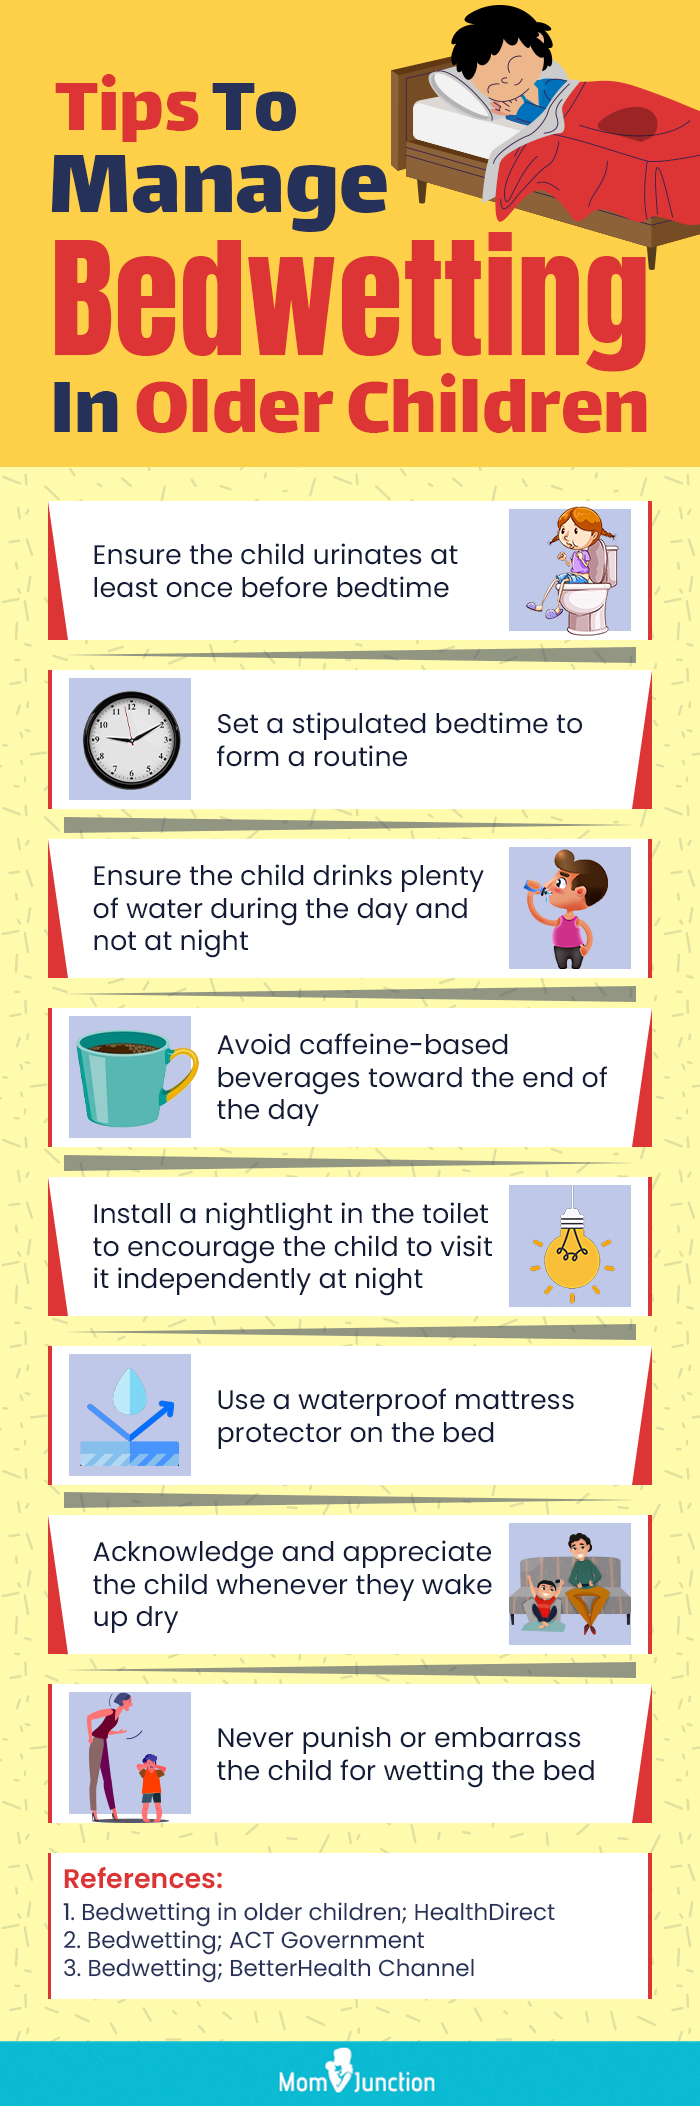 Tips To Manage Bedwetting In Older Children (Infographic)